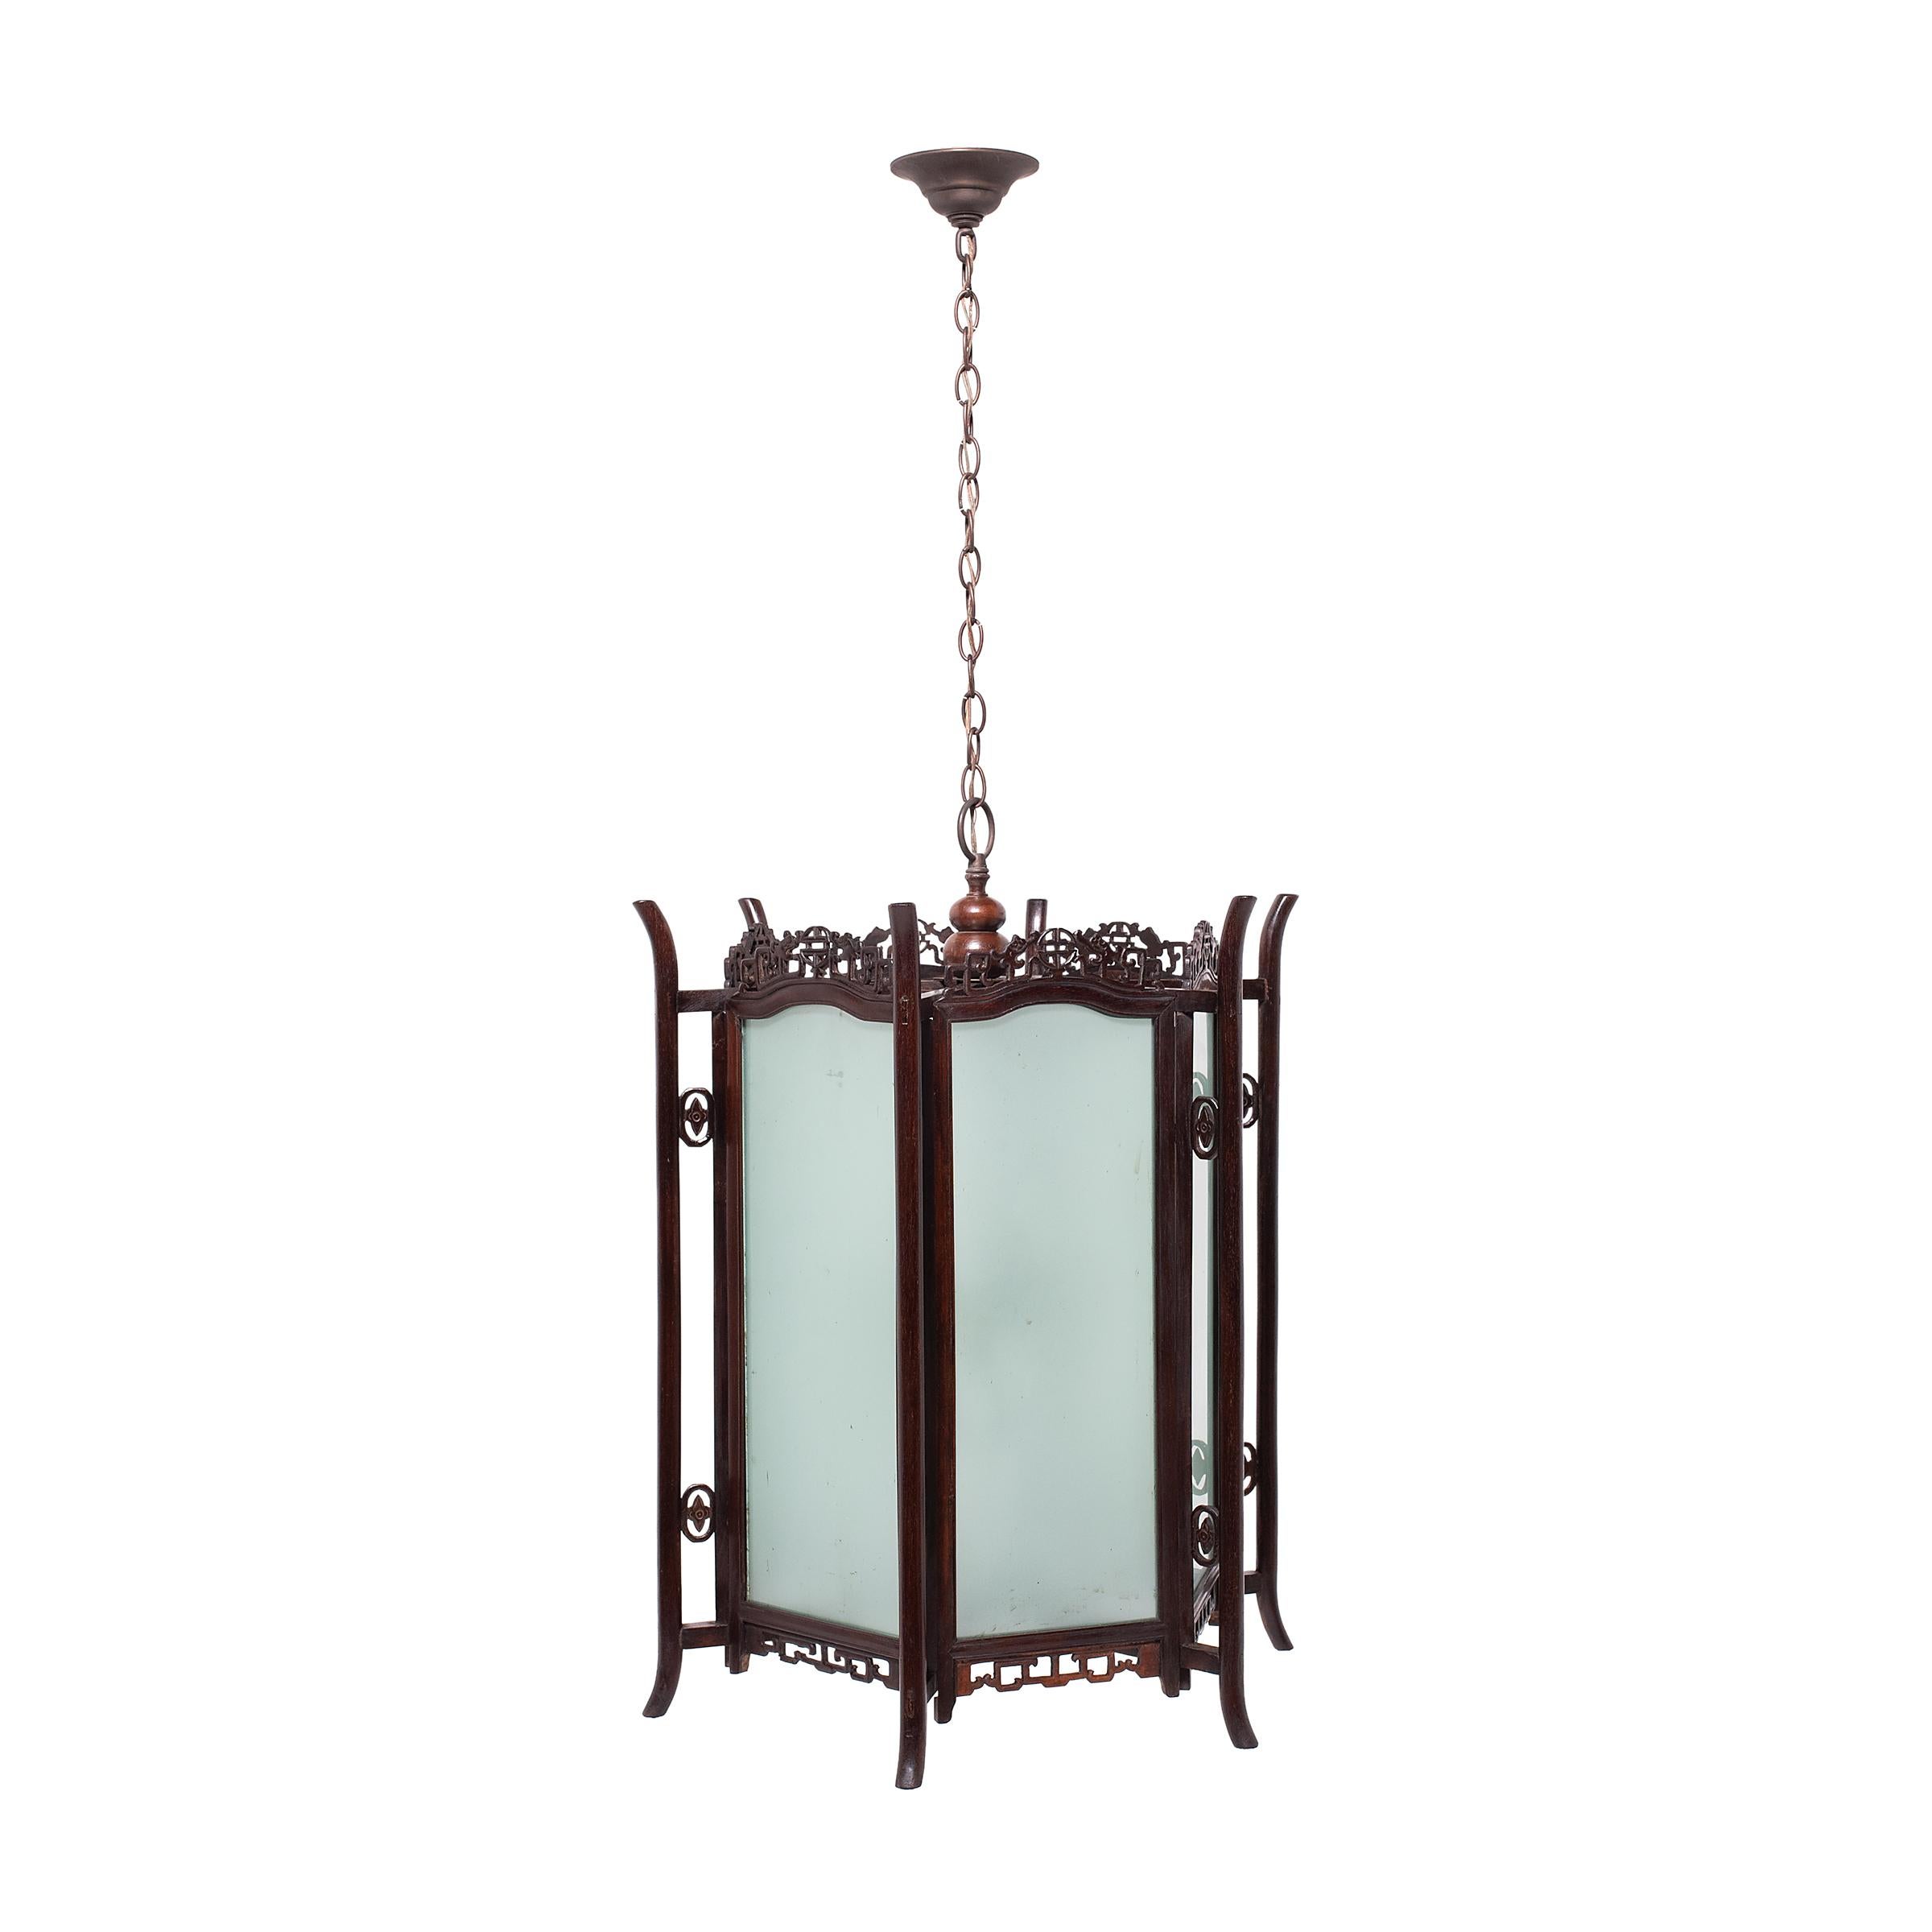 Expertly constructed with beautiful rosewood frames and frosted glass panels, these ornate hanging lanterns once diffused candlelight throughout a fine Qing-dynasty courtyard home. Each lantern has a hexagonal design, with six elongated glass panels